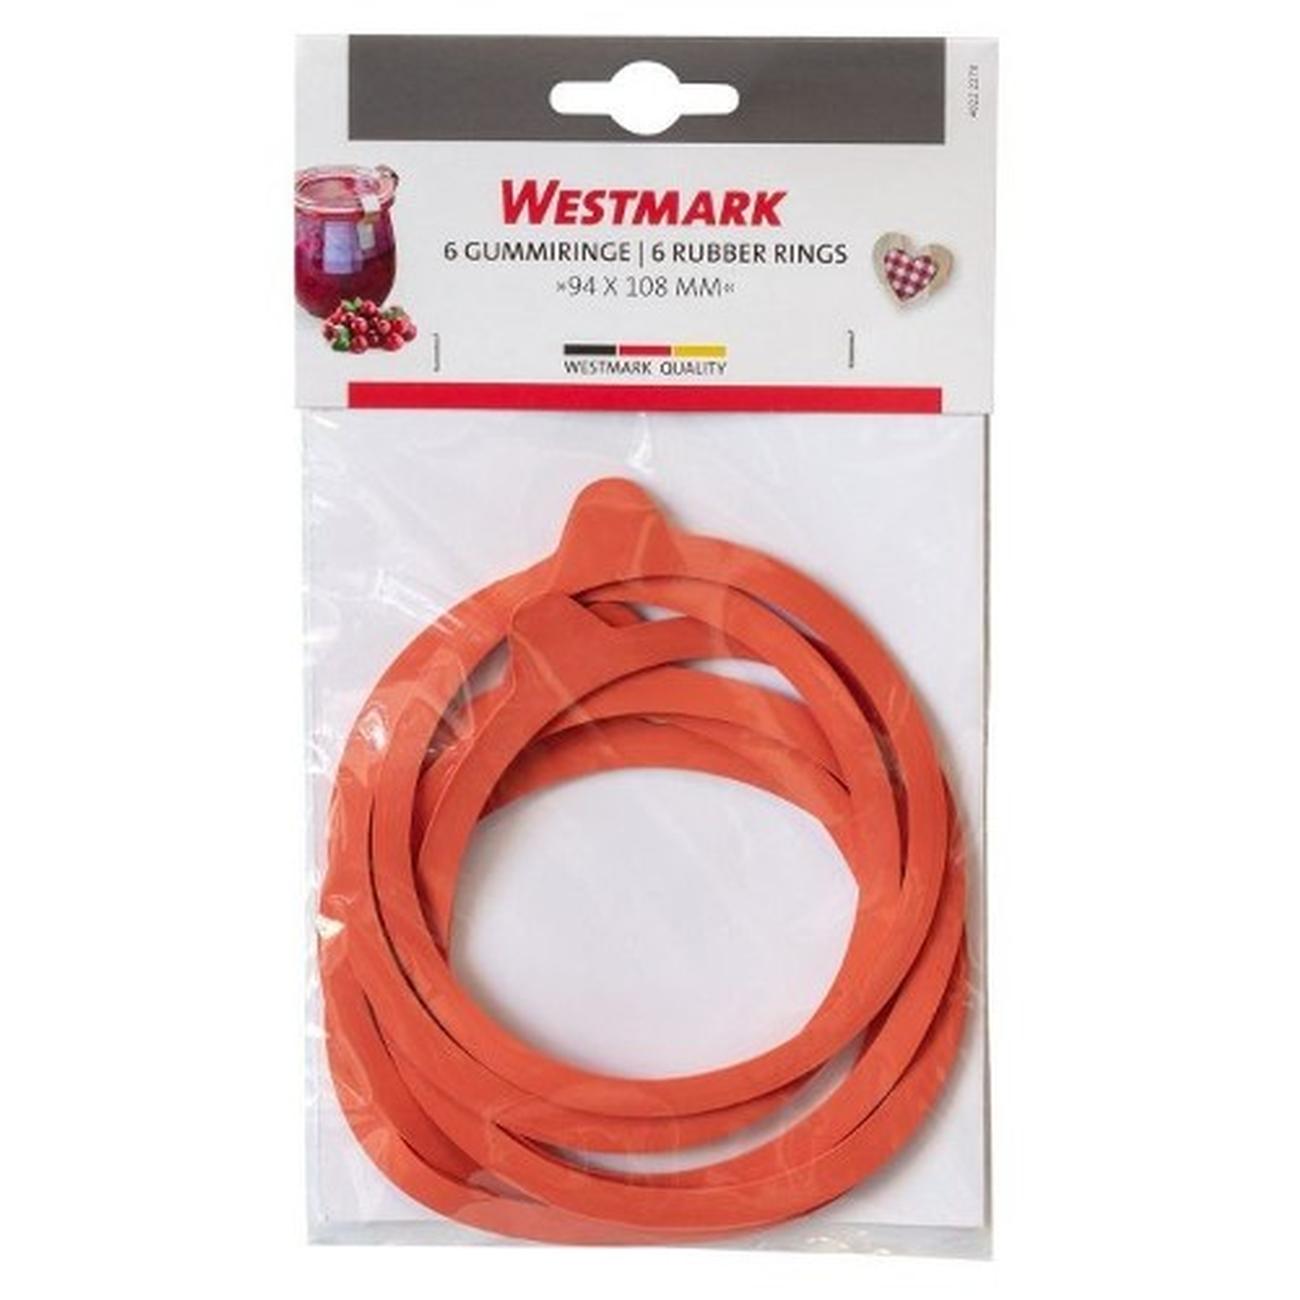 weck-jar-6pc-rubber-seals-94x108mm - Weck Jar Rubber Rings 6pc 94x108mm